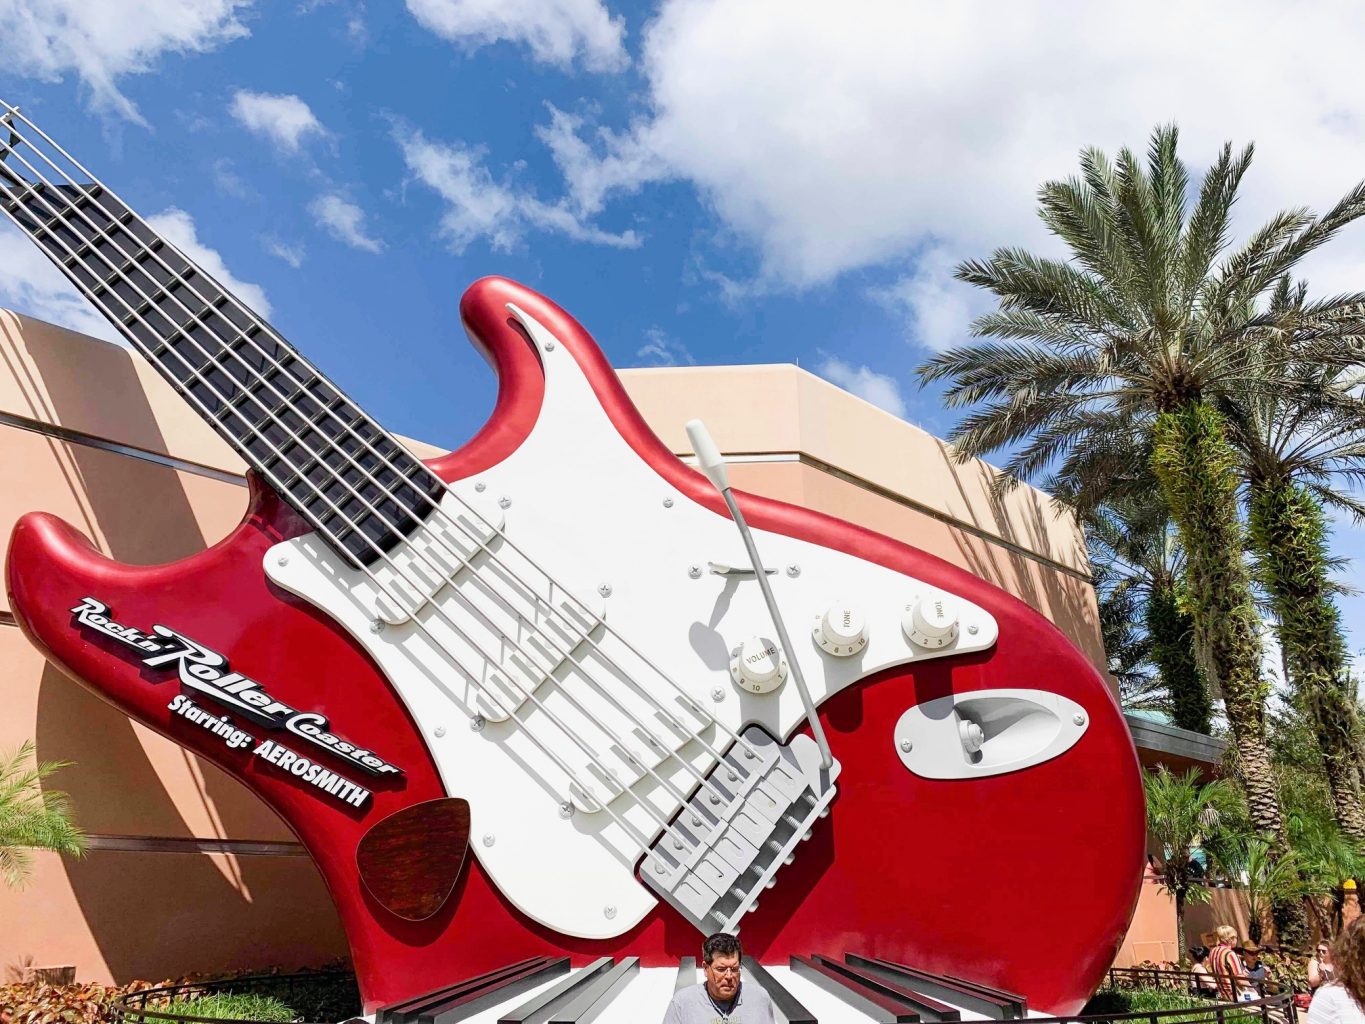 Things To Do In Disney World Rock n Roller Coaster